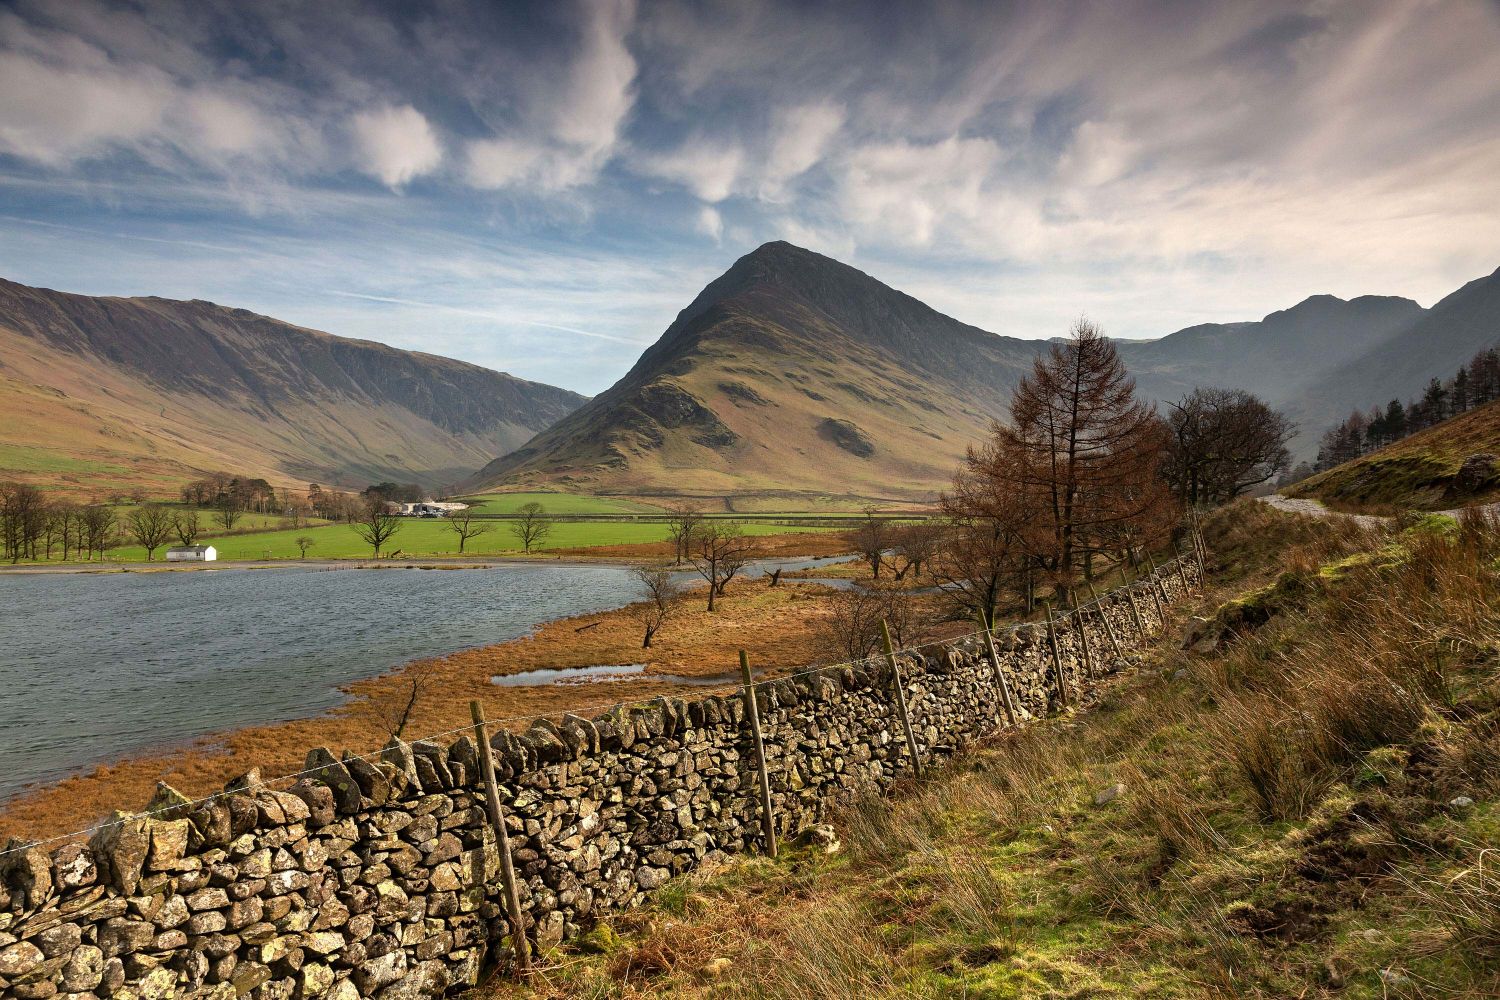 Fleetwith Pike at the head of Buttermere